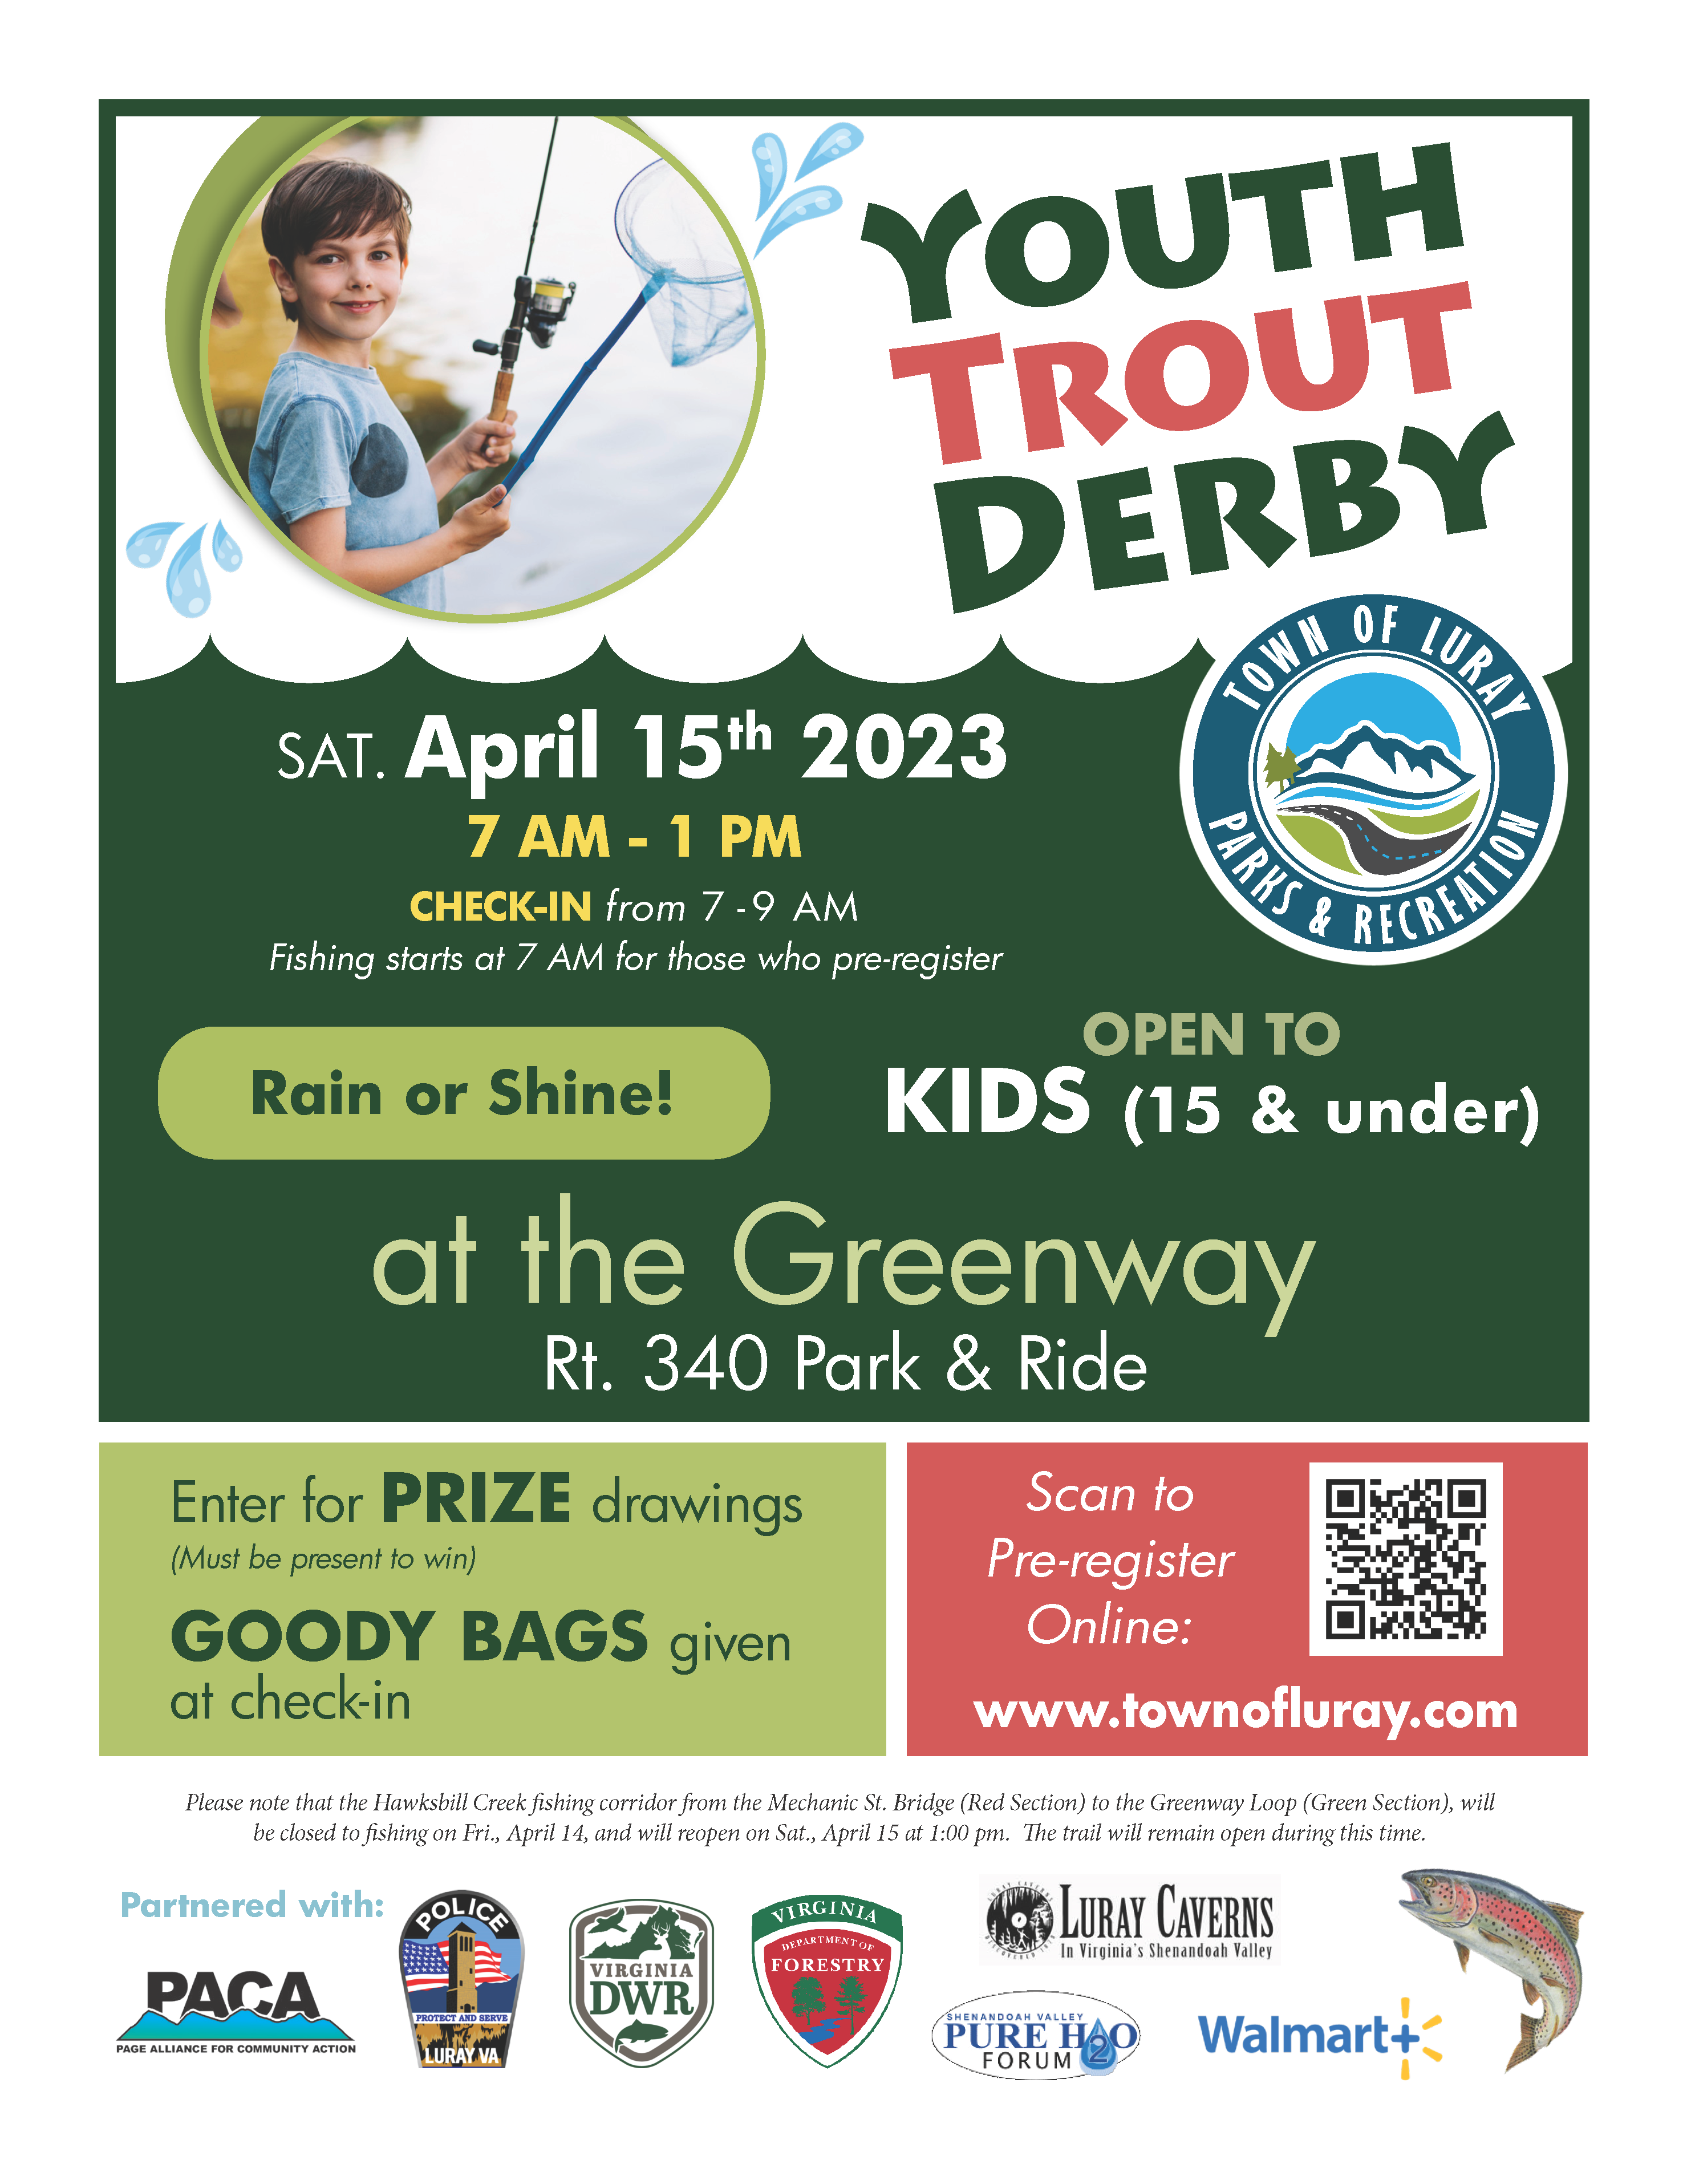 Luray's Youth Trout Derby